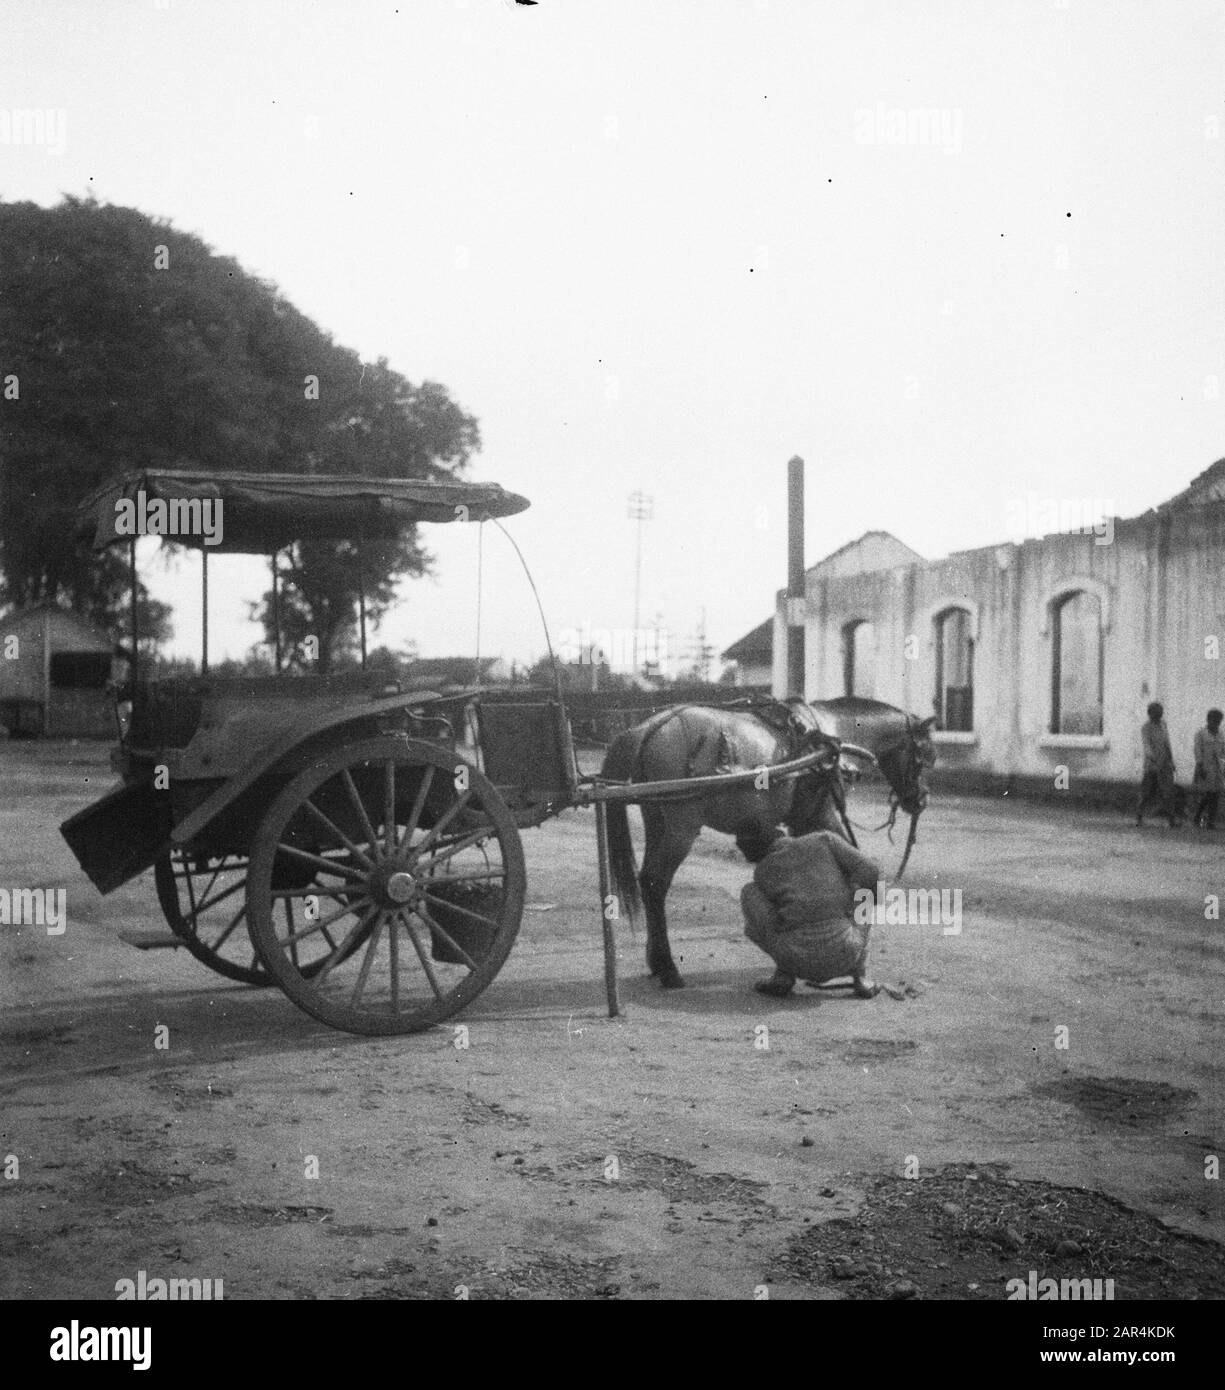 Magelang en surroundings  [a Dokar (horse and wagon) is standing on the street near a burned-out building] Date: February 13, 1949 Location: Indonesia, Dutch East Indies Stock Photo